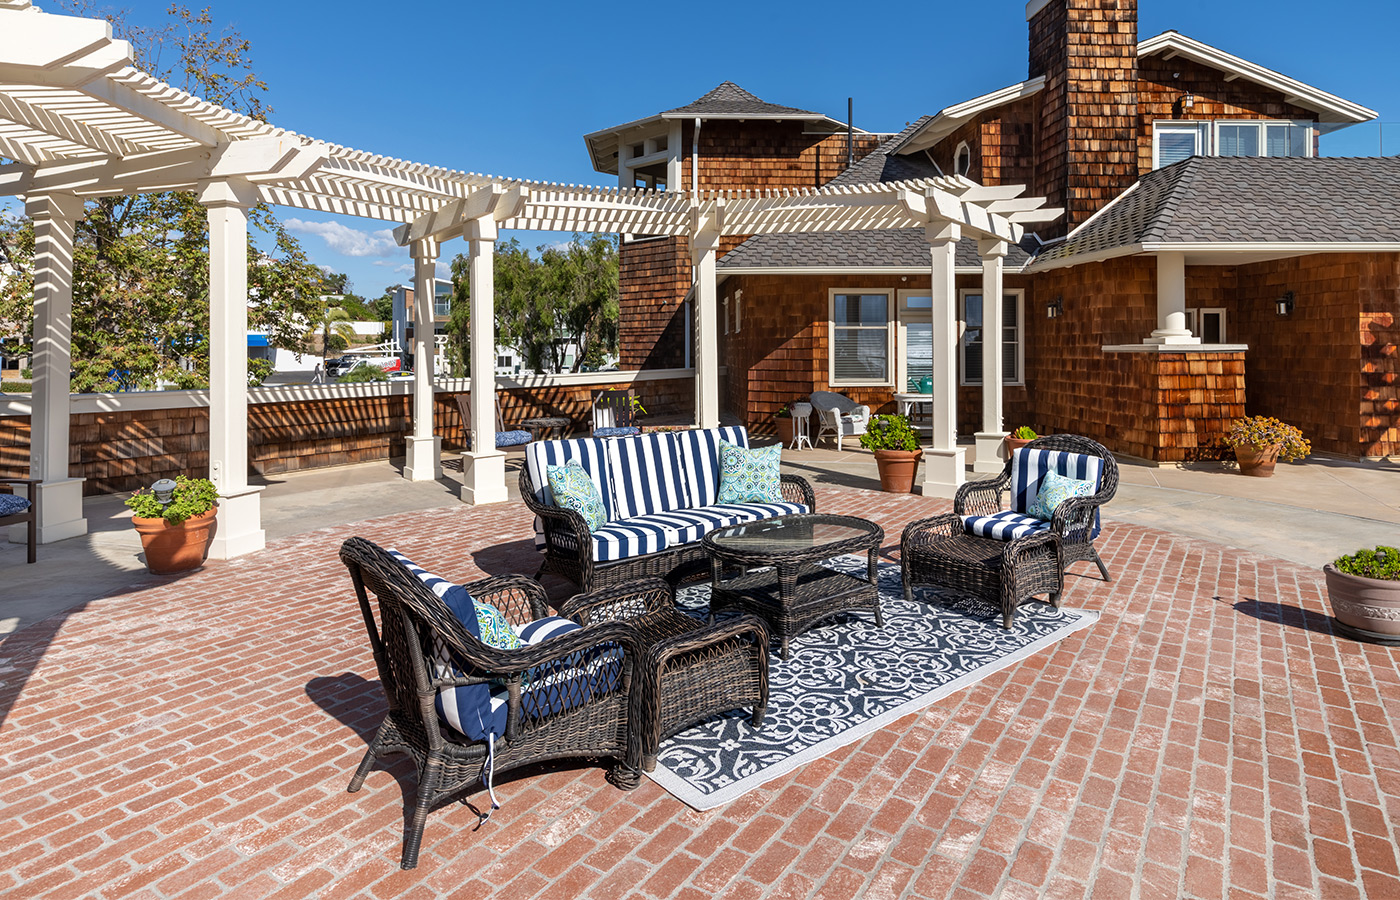 large sunny patio area with elegant patio furniture and navy blue rug